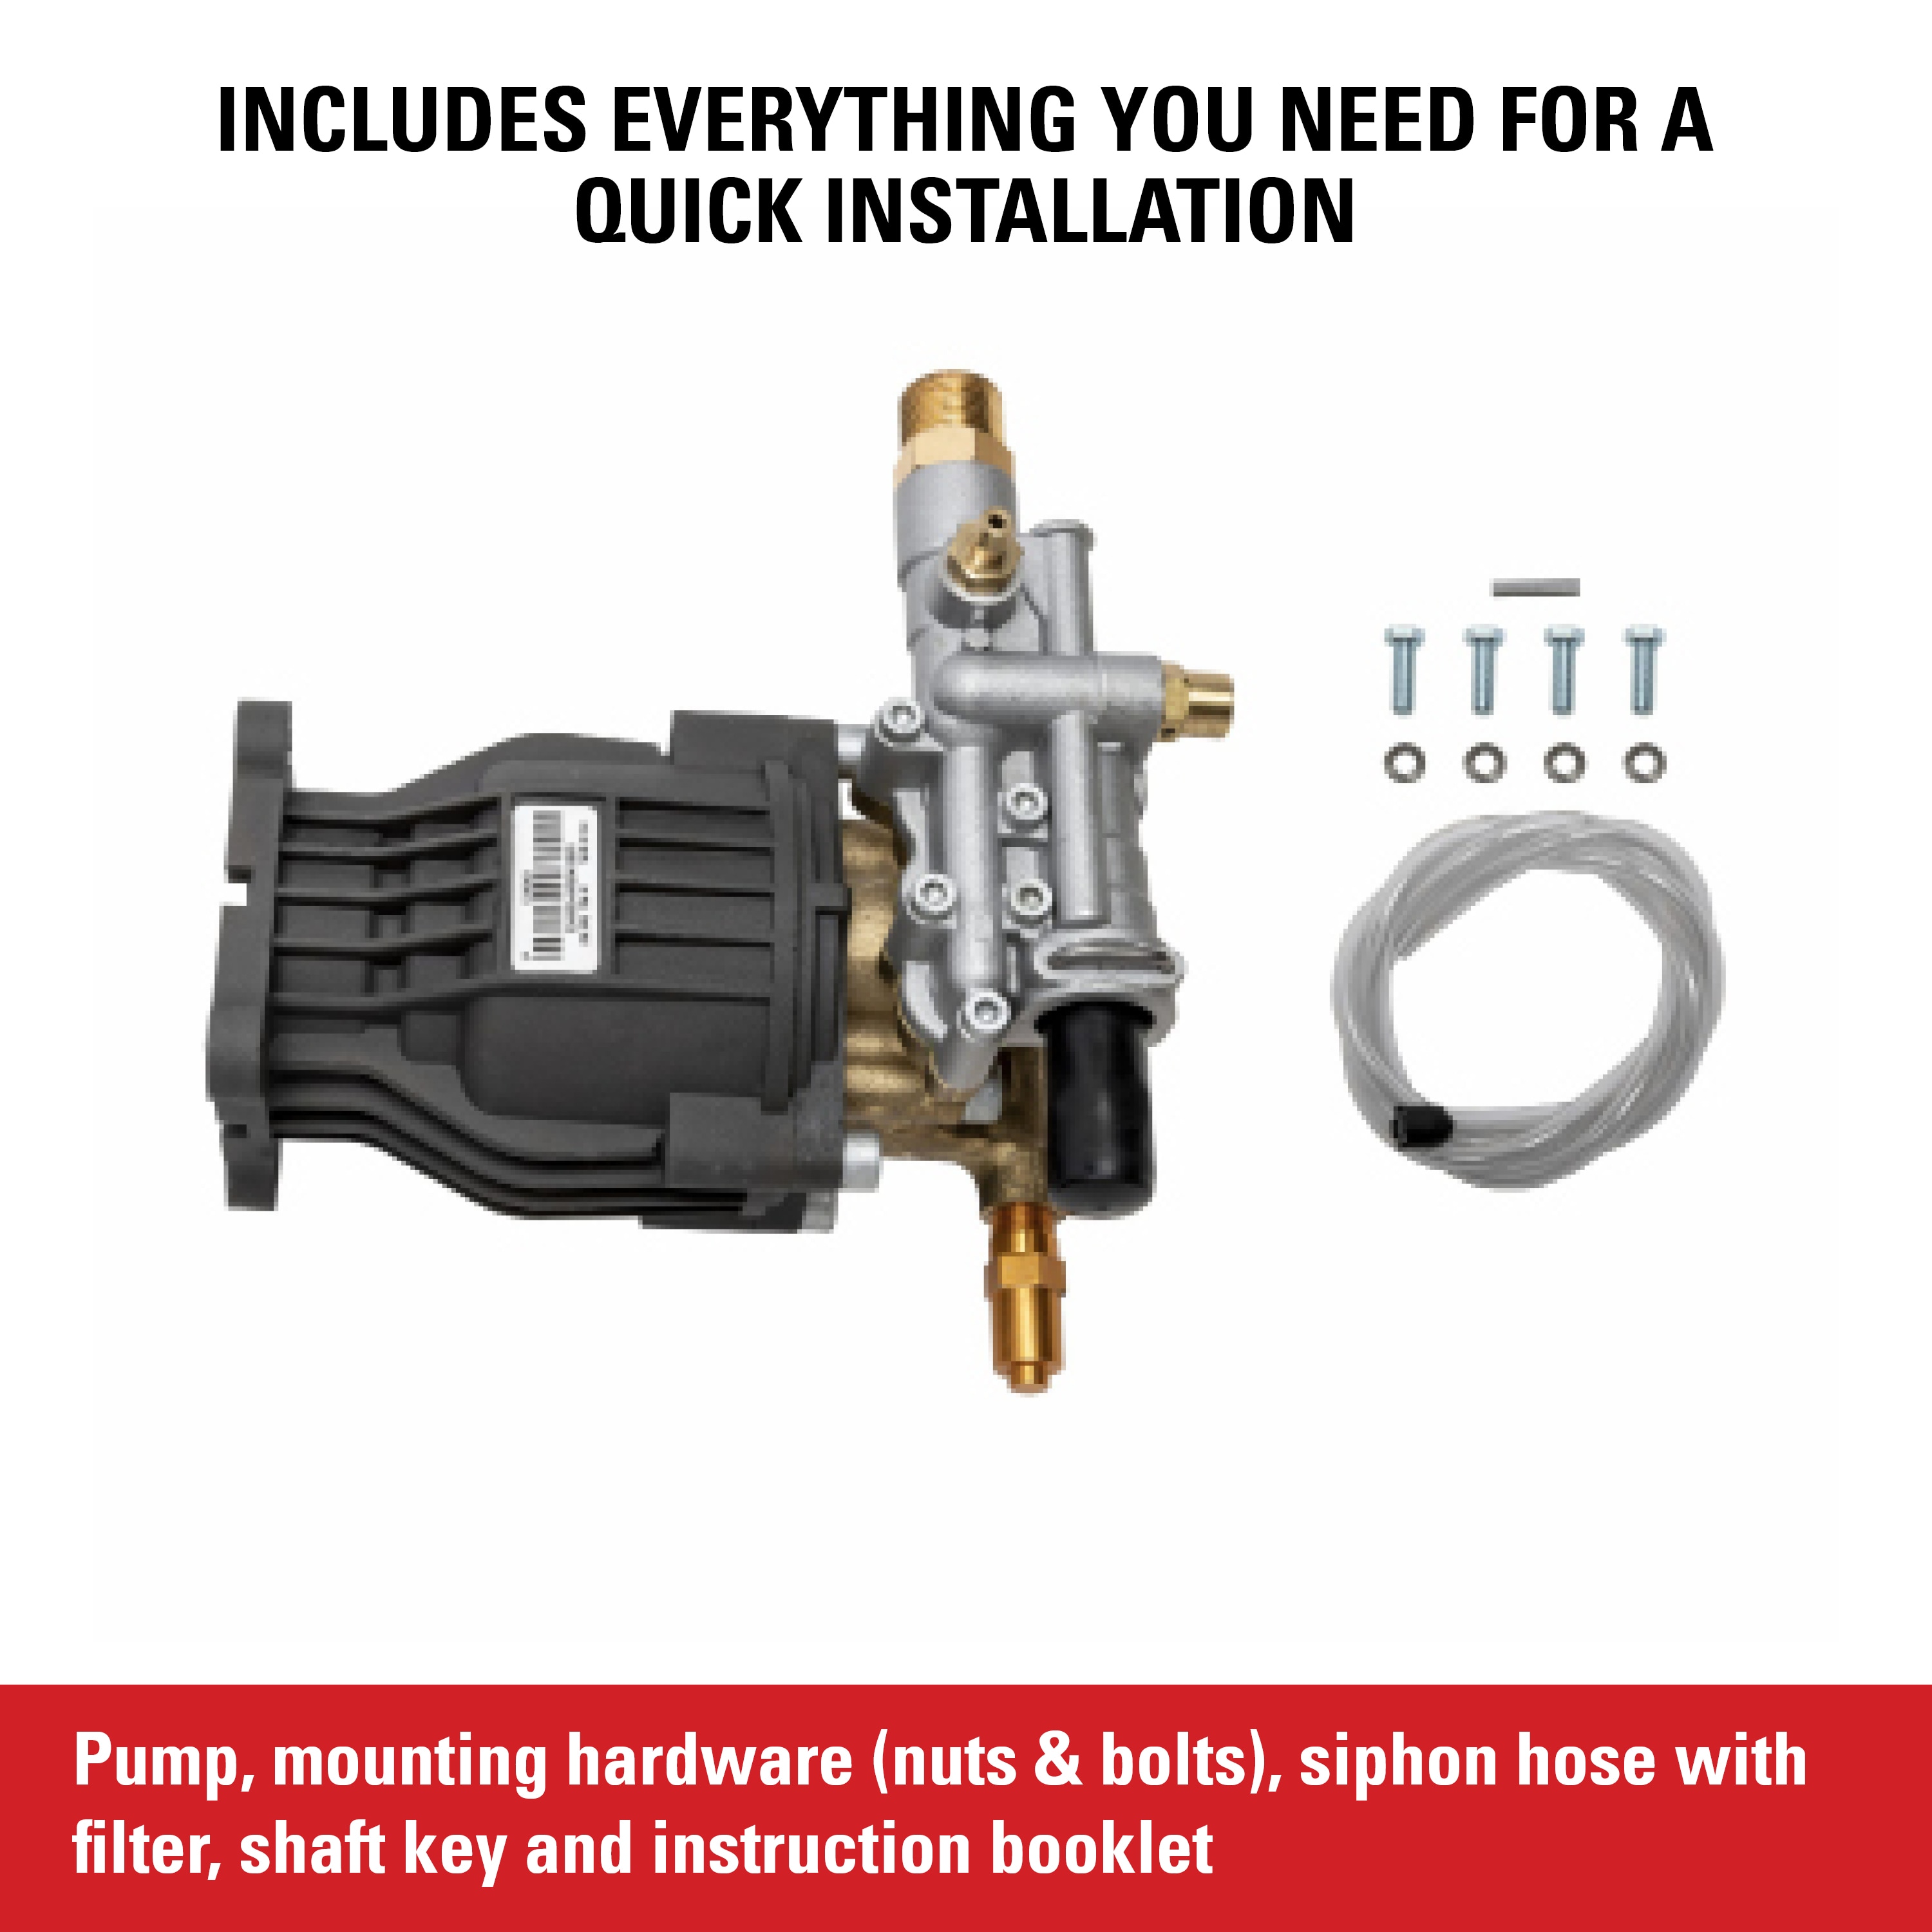 YAMATIC 3400 PSI Horizontal Pressure Washer Pump 3/4 Shaft @ 2.6 GPM Replacement OEM Pump Compatible with Simpson Honda Excel Brute and More Gas Power Washers 